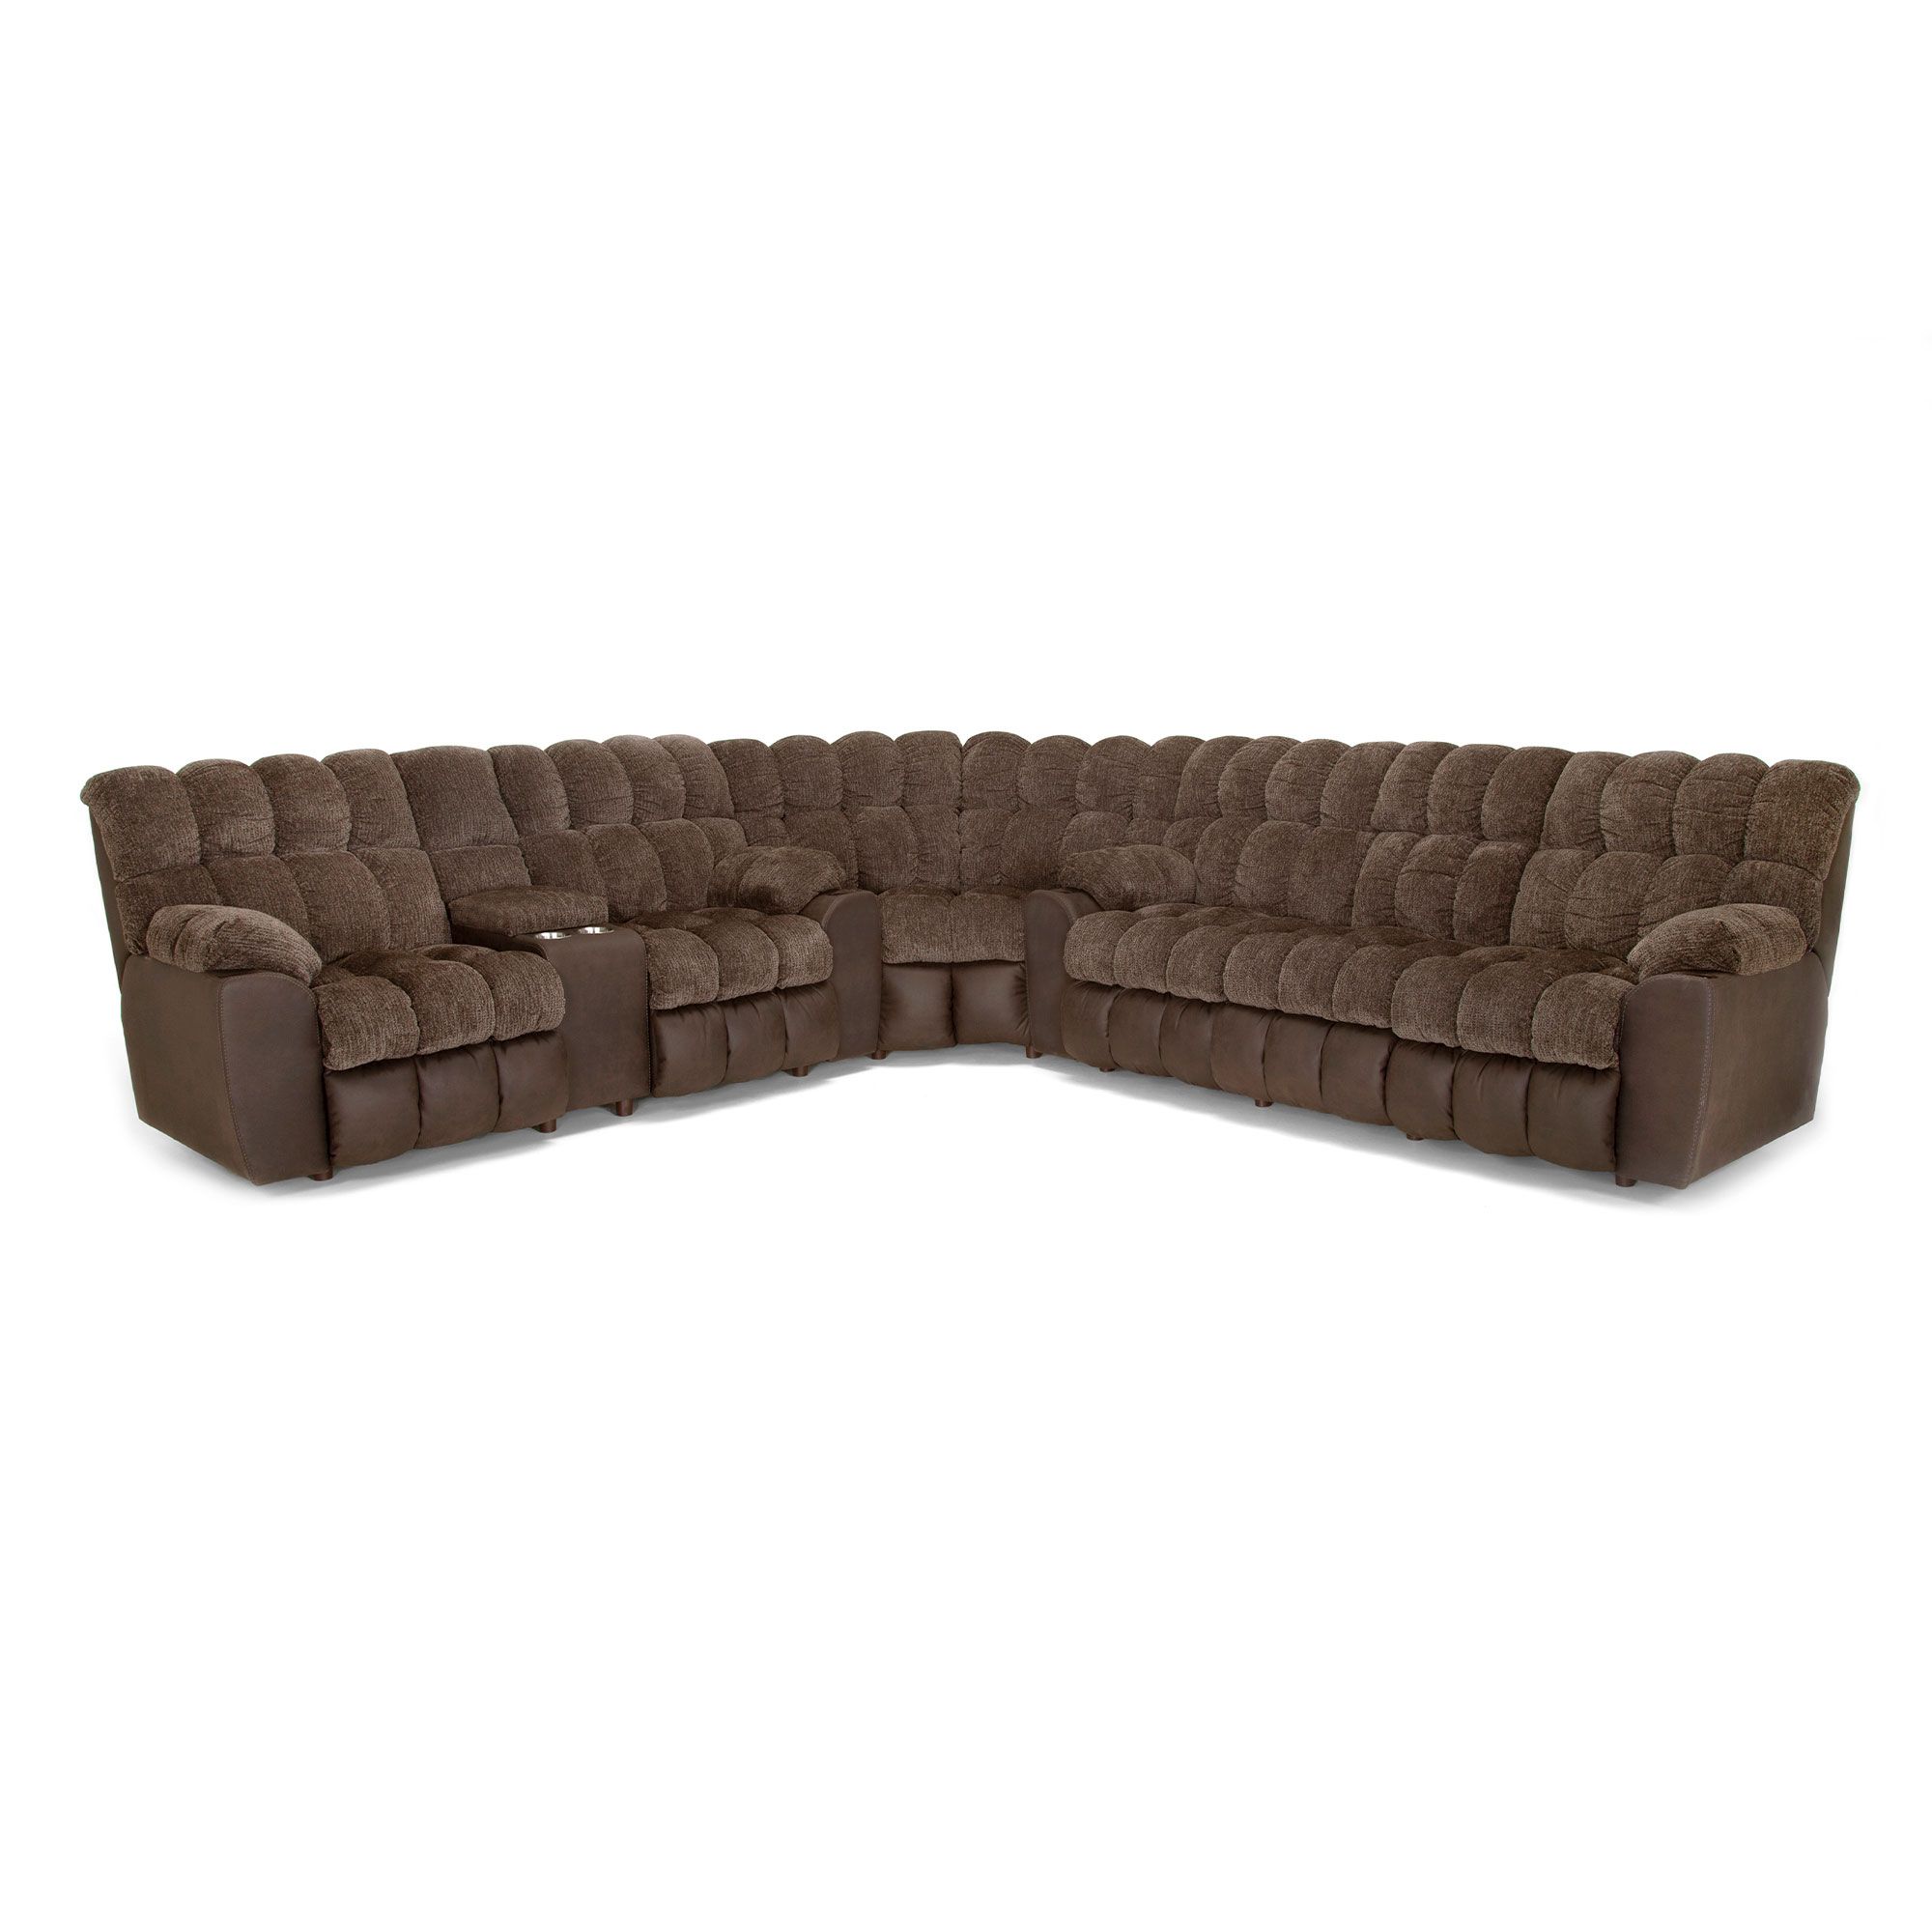 Popular 440 Brayden Sectional – Franklin Corporation In Colby Manual Reclining Sofas (View 7 of 15)